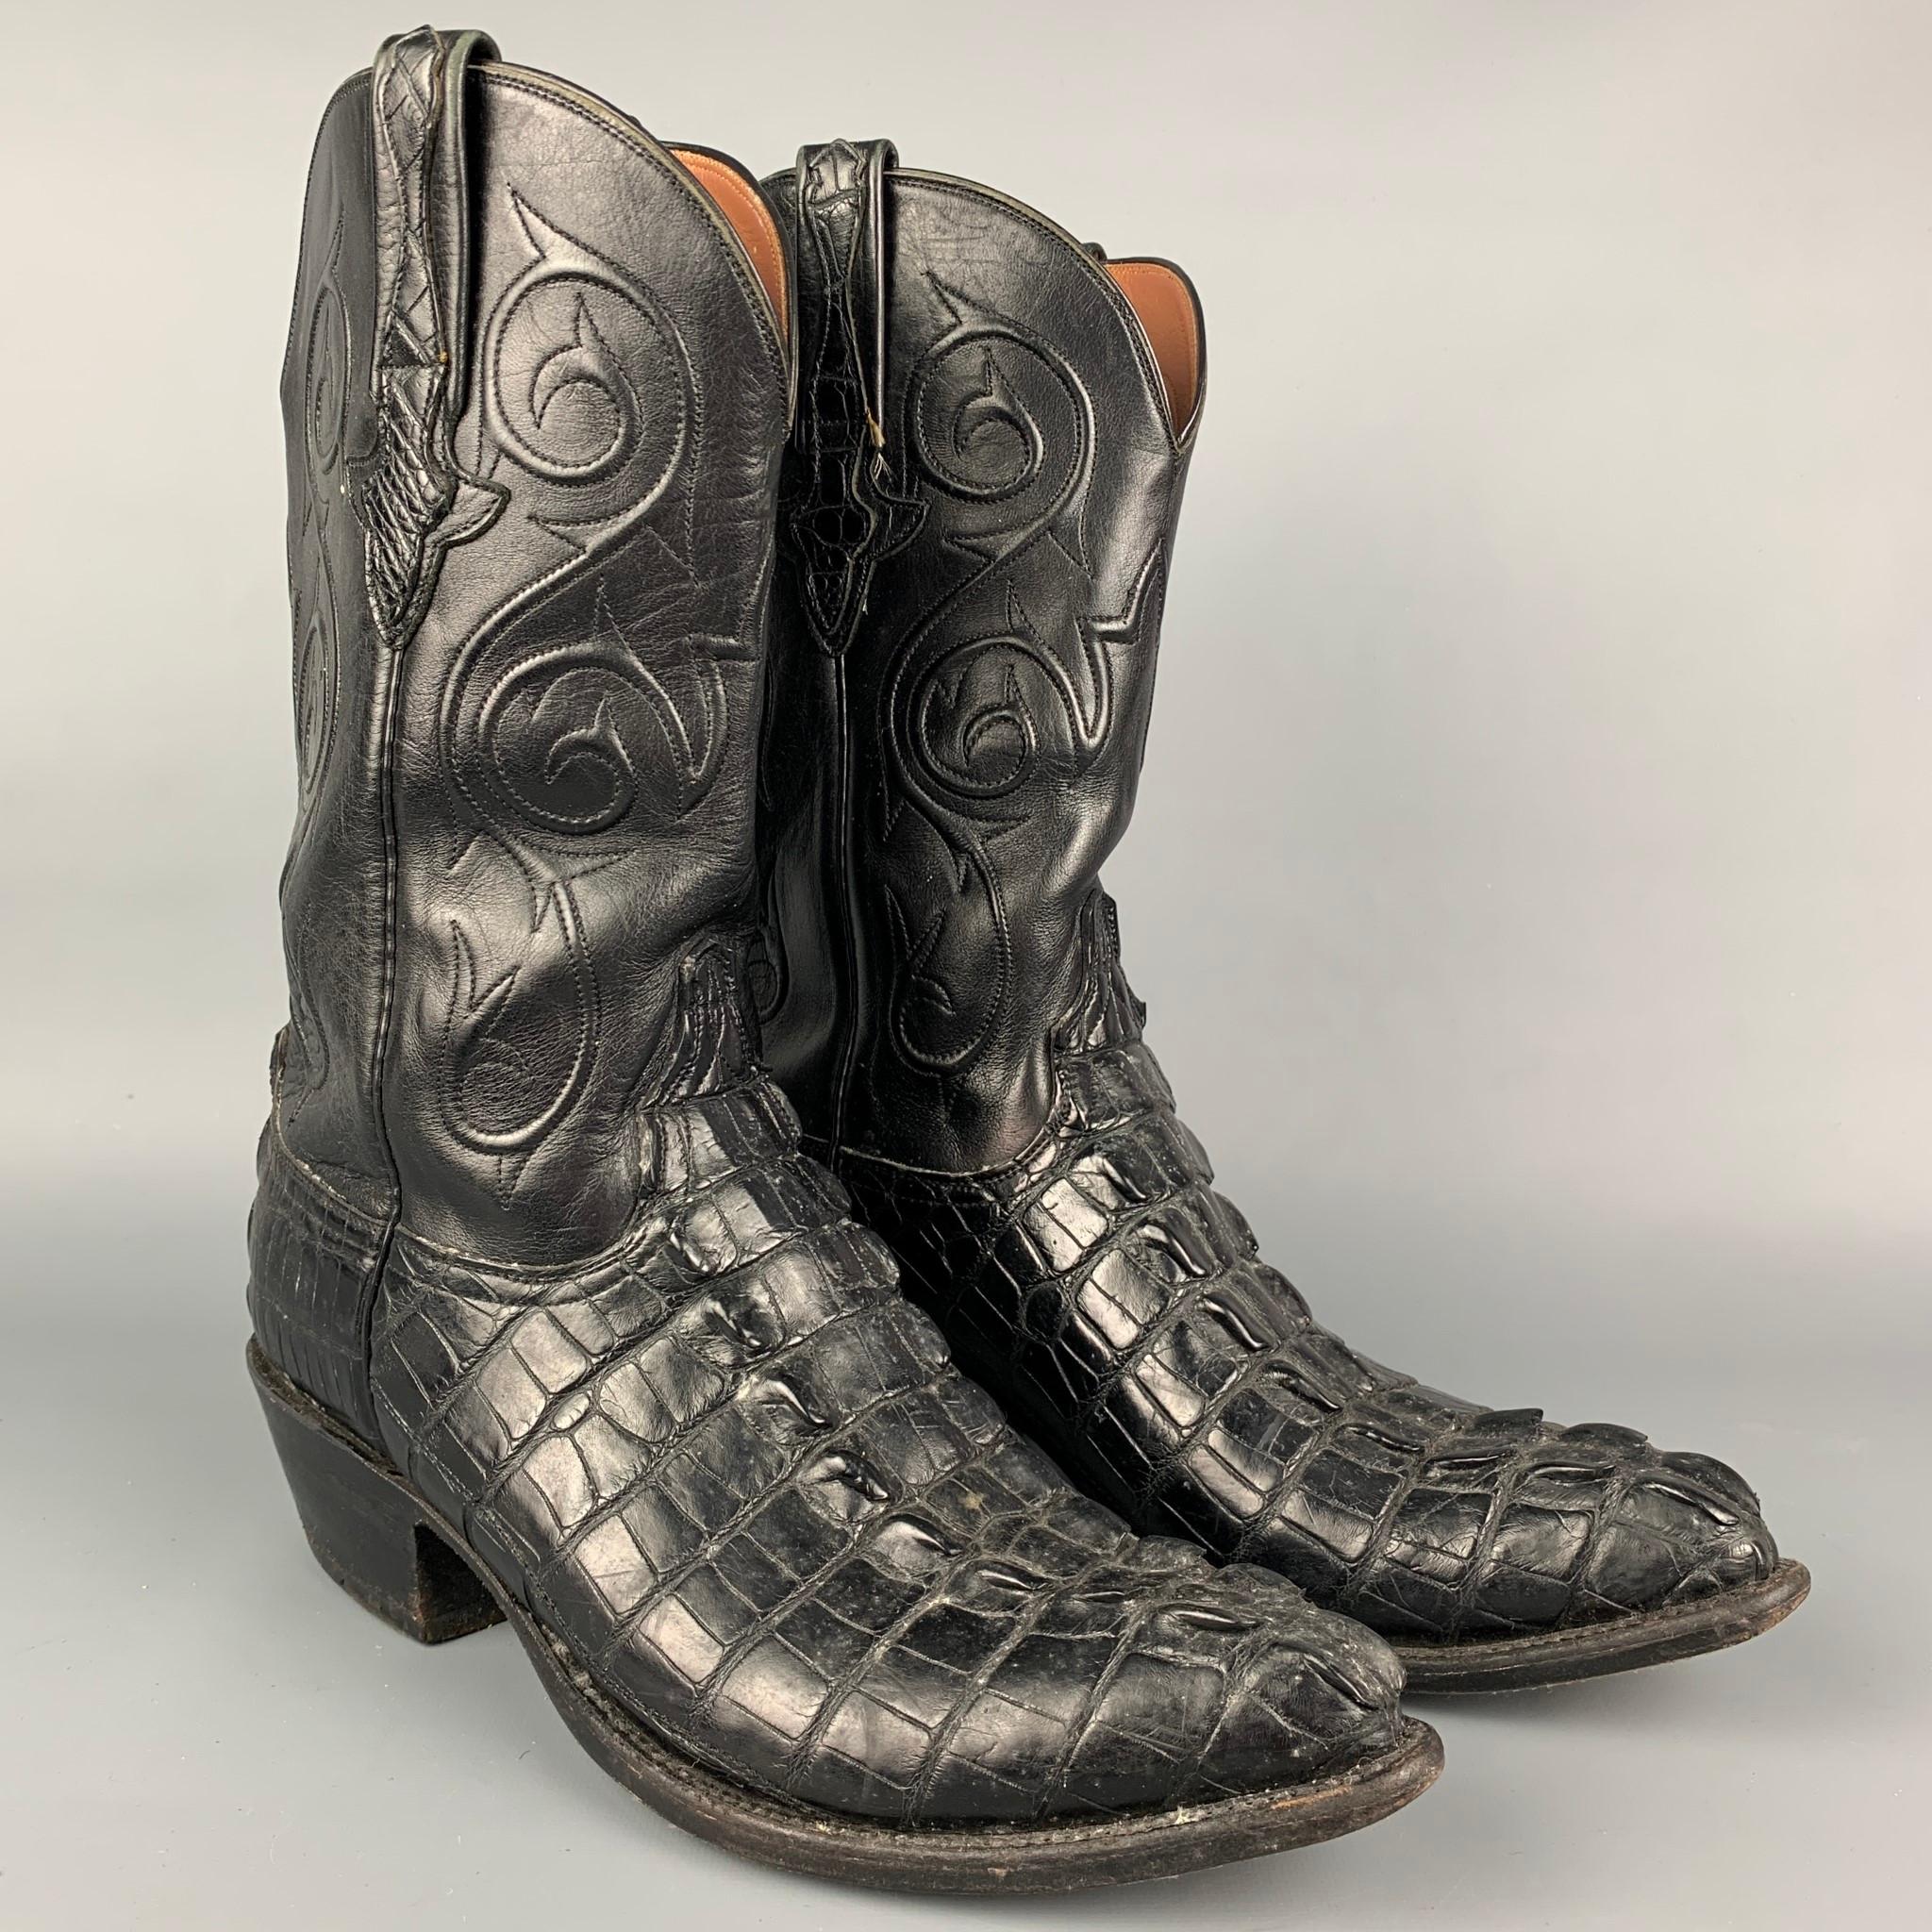 LUCCHESE boots comes in a black alligator leather featuring a pointed toe, slip on, and a chunky heel. Made in USA. 

Good Pre-Owned Condition.
Marked: 11 D 30562
Original Retail Price: $795.00

Measurements:

Length: 12 in.
Width: 4 in.
Height: 12